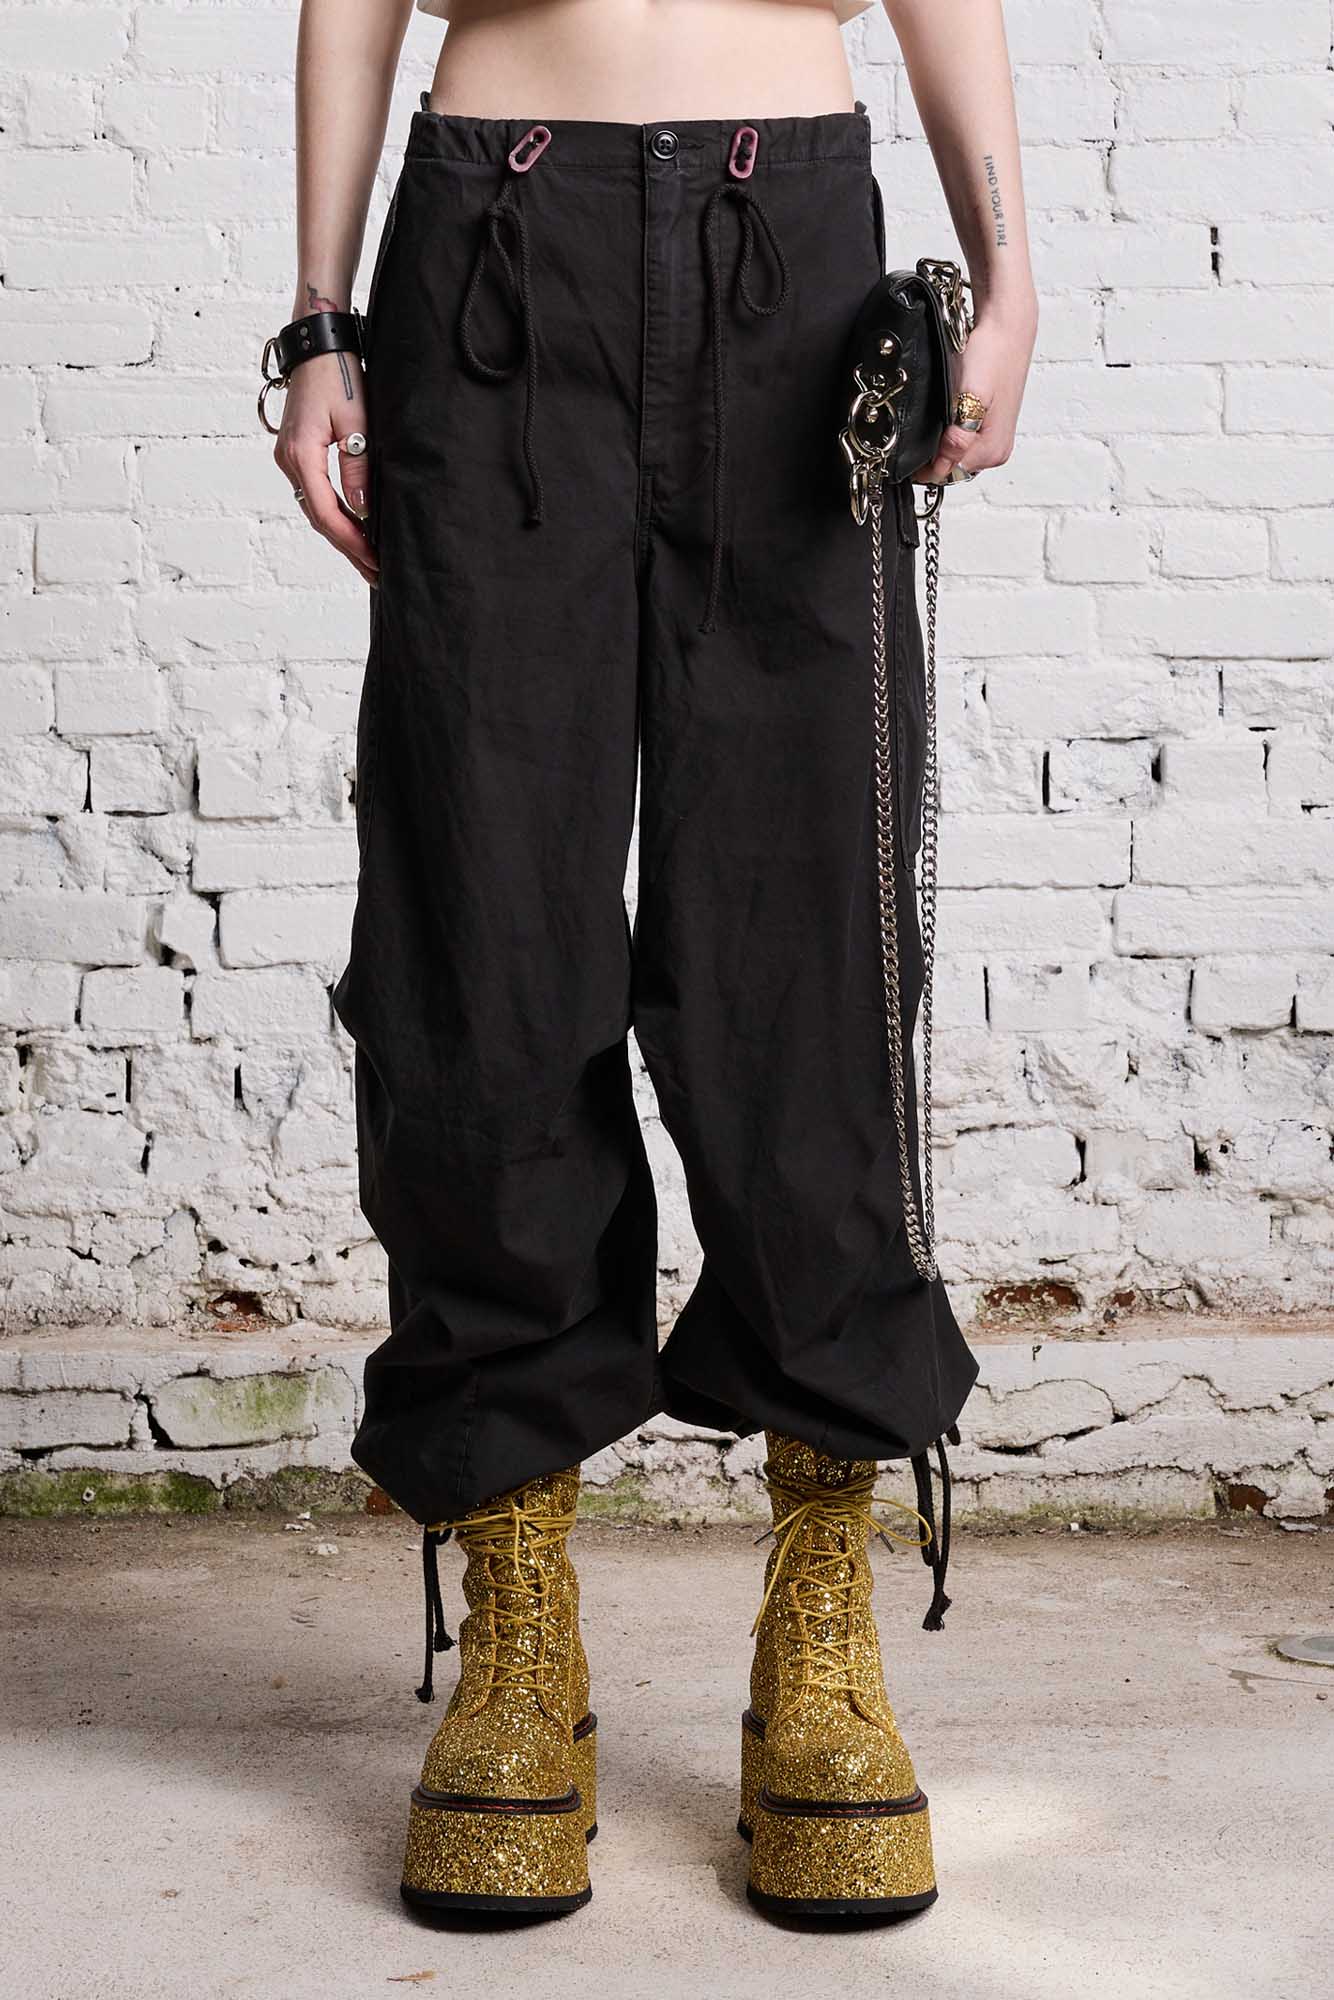 R13 Balloon Army Pants in Washed Black